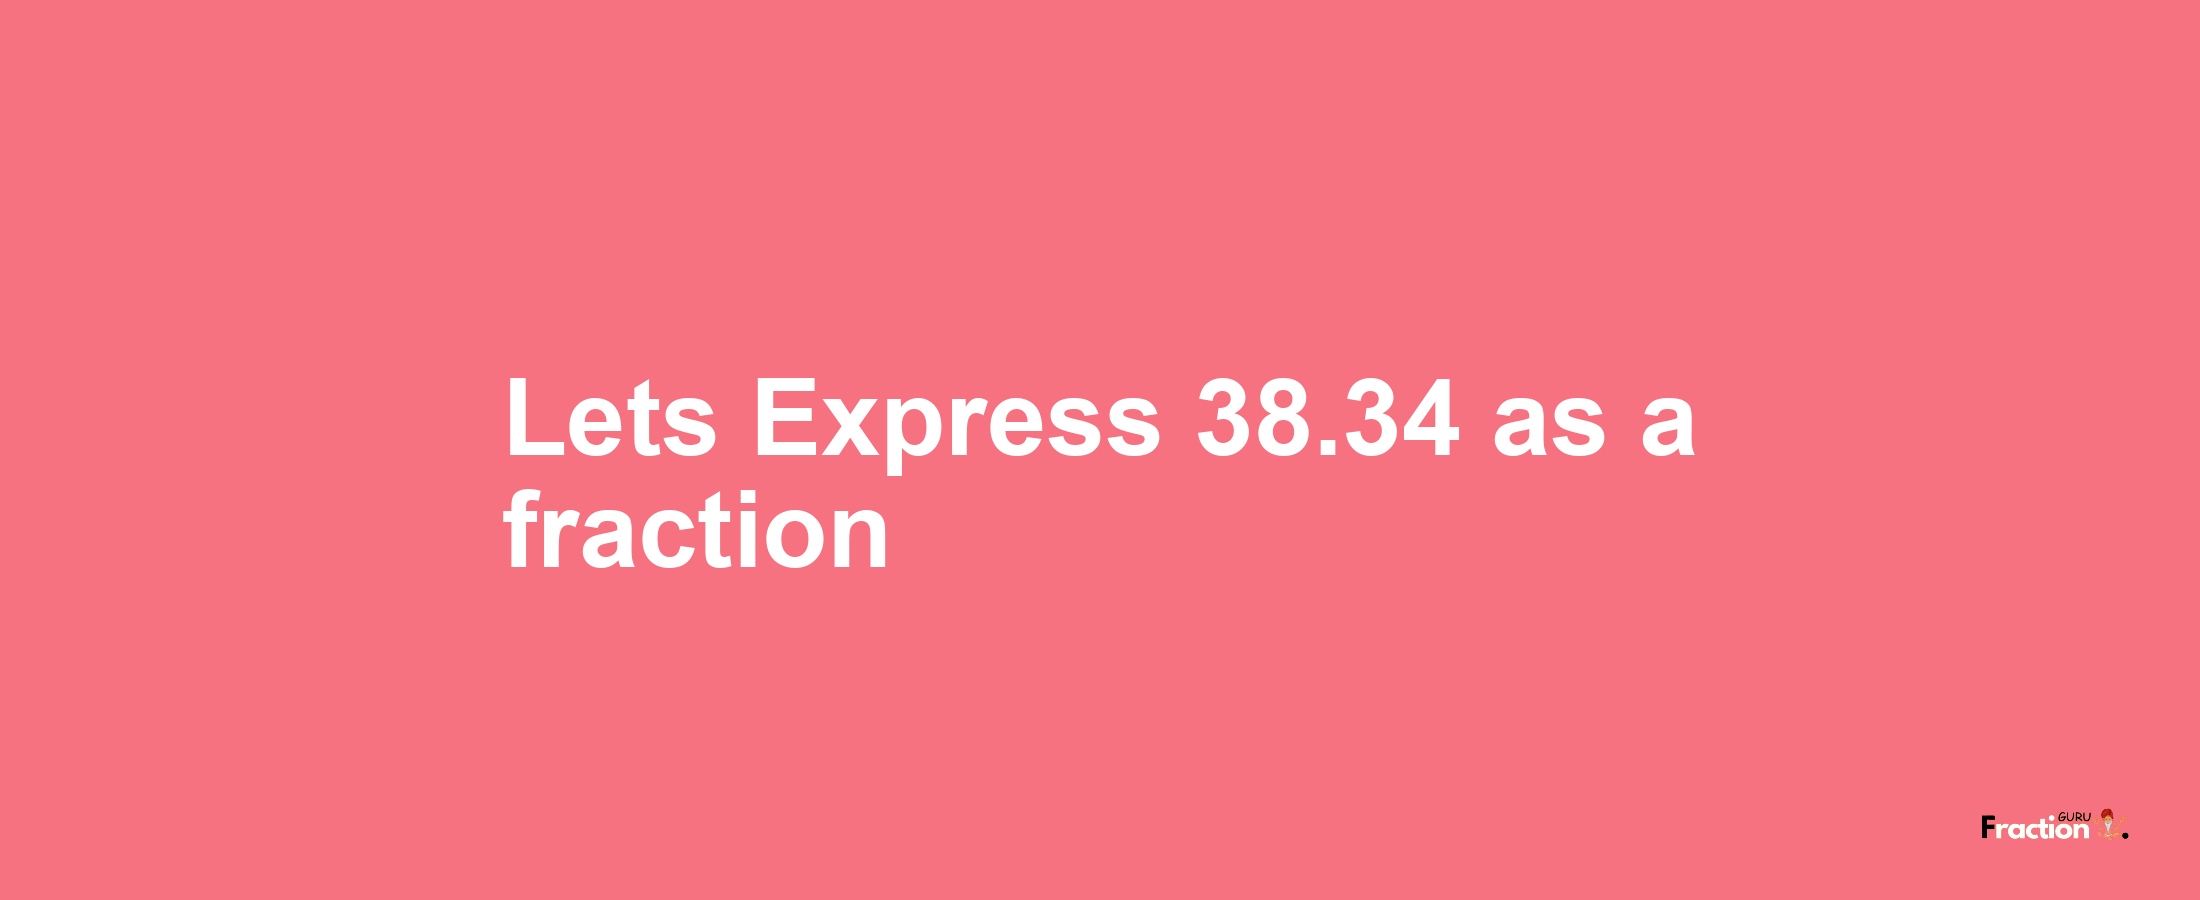 Lets Express 38.34 as afraction